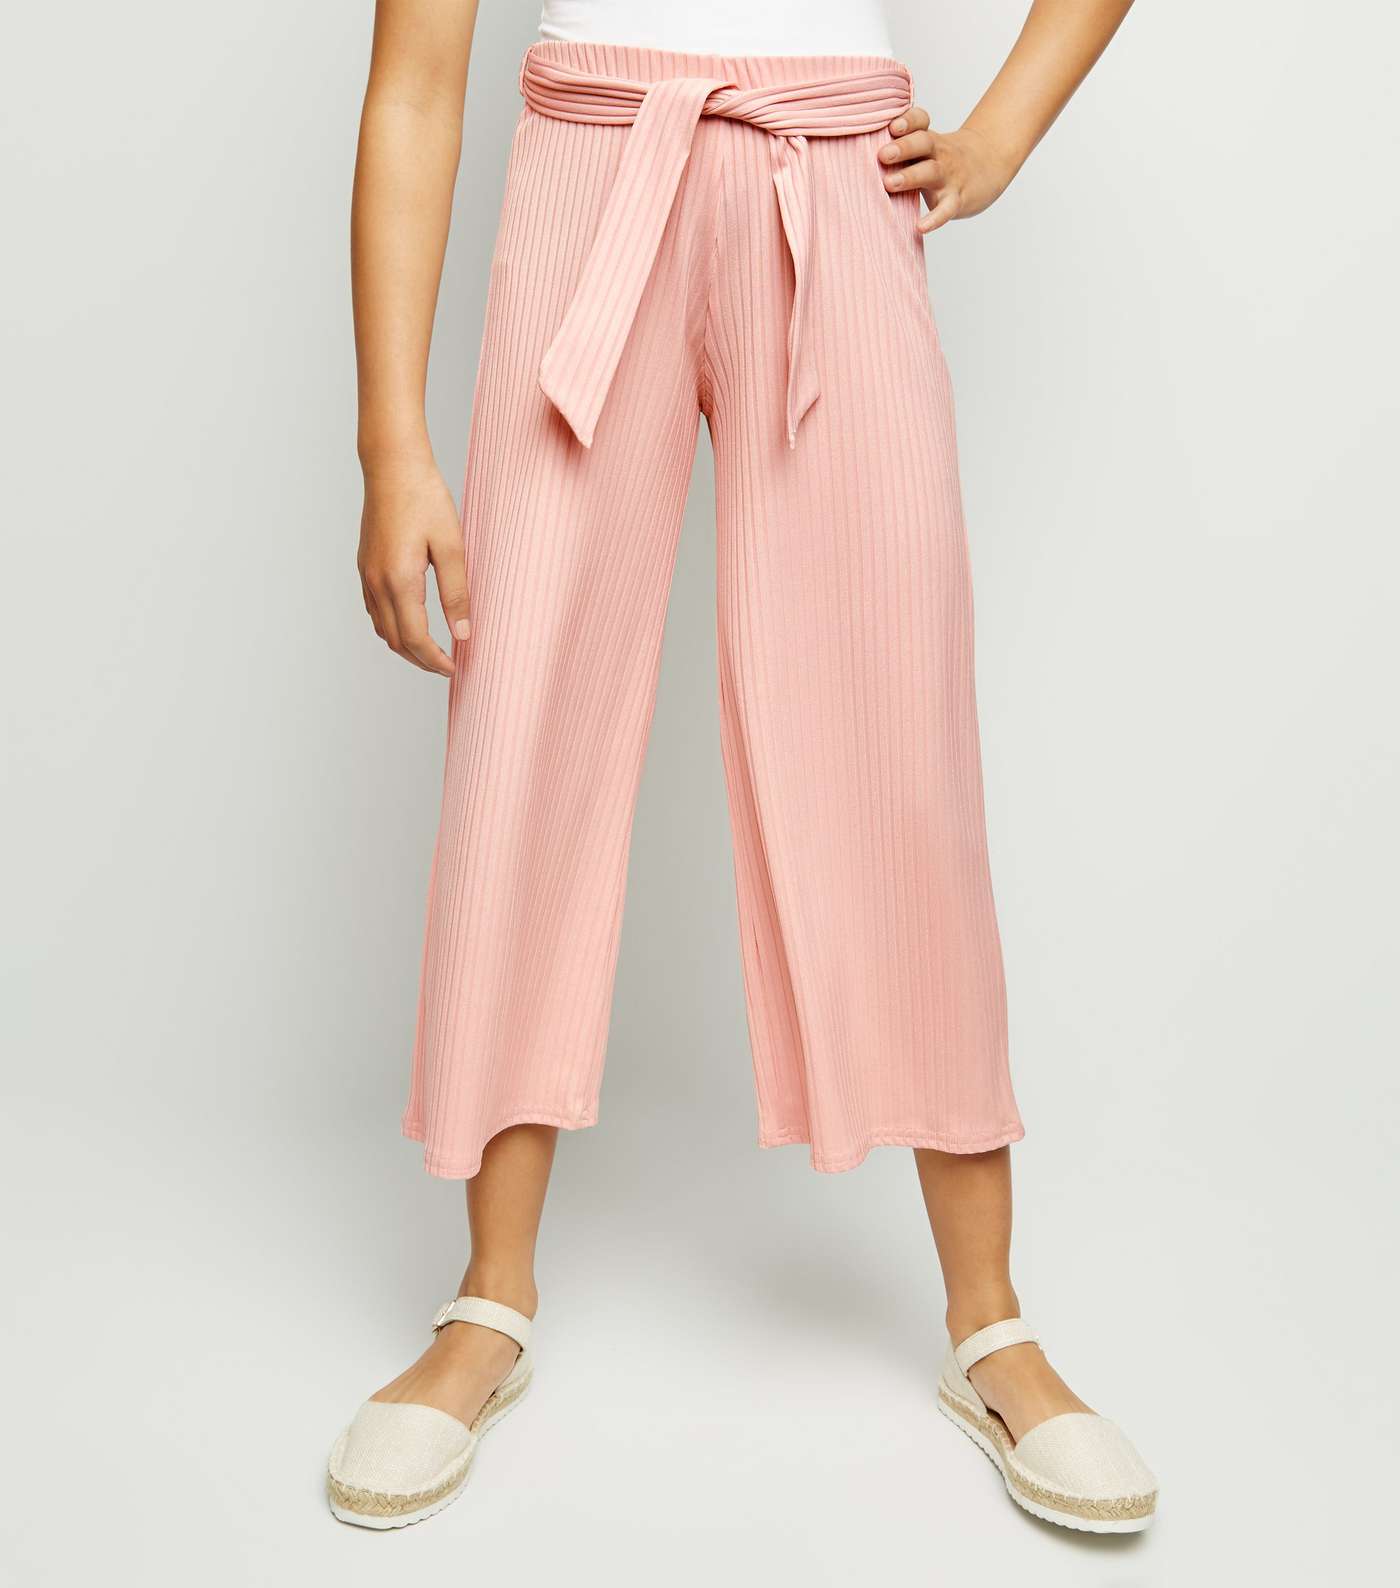 Girls Pale Pink Ribbed Culottes Image 2